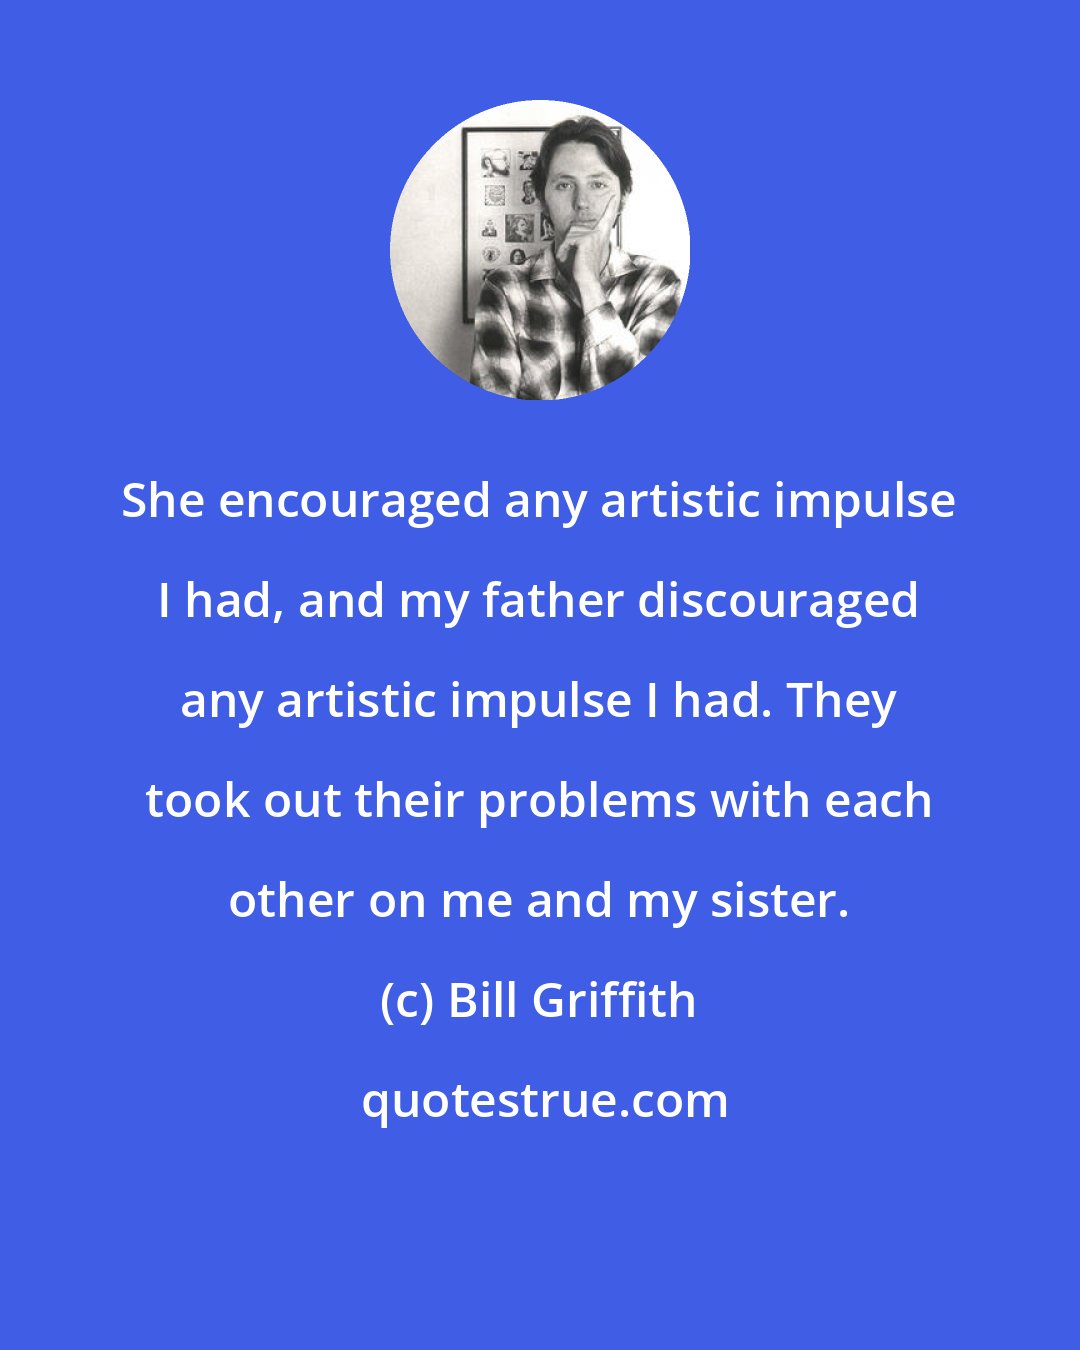 Bill Griffith: She encouraged any artistic impulse I had, and my father discouraged any artistic impulse I had. They took out their problems with each other on me and my sister.